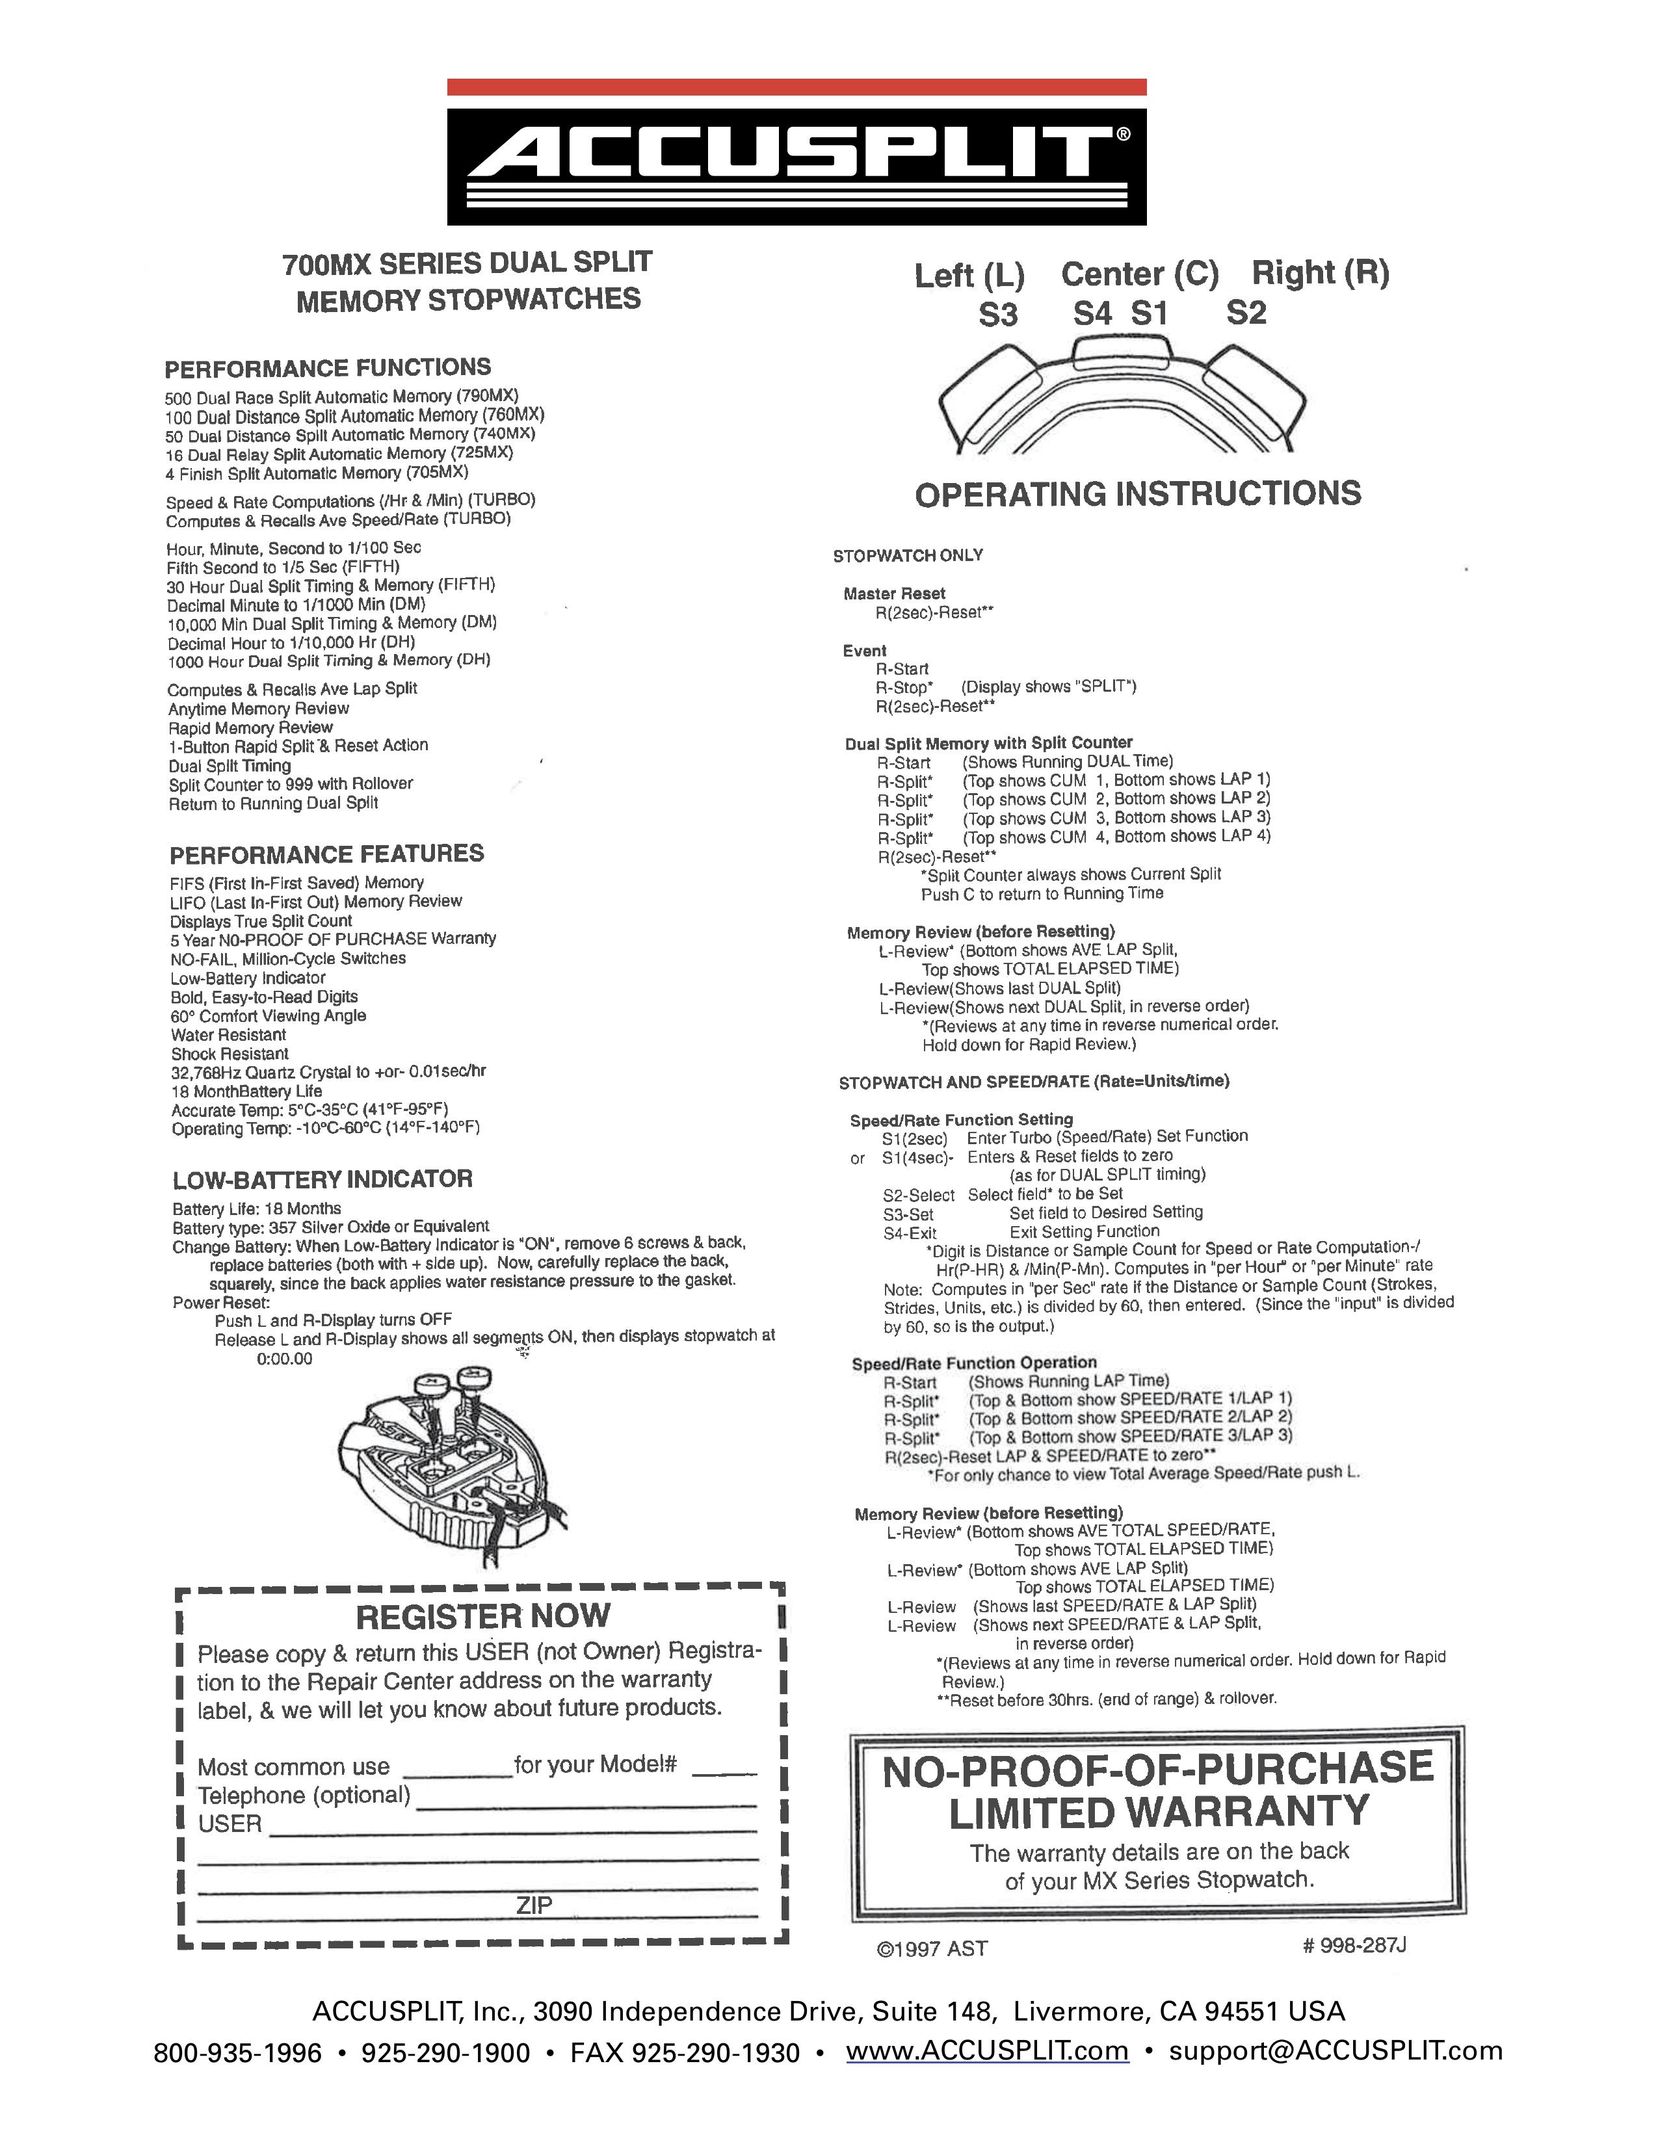 Accusplit A725MXDMT Watch User Manual